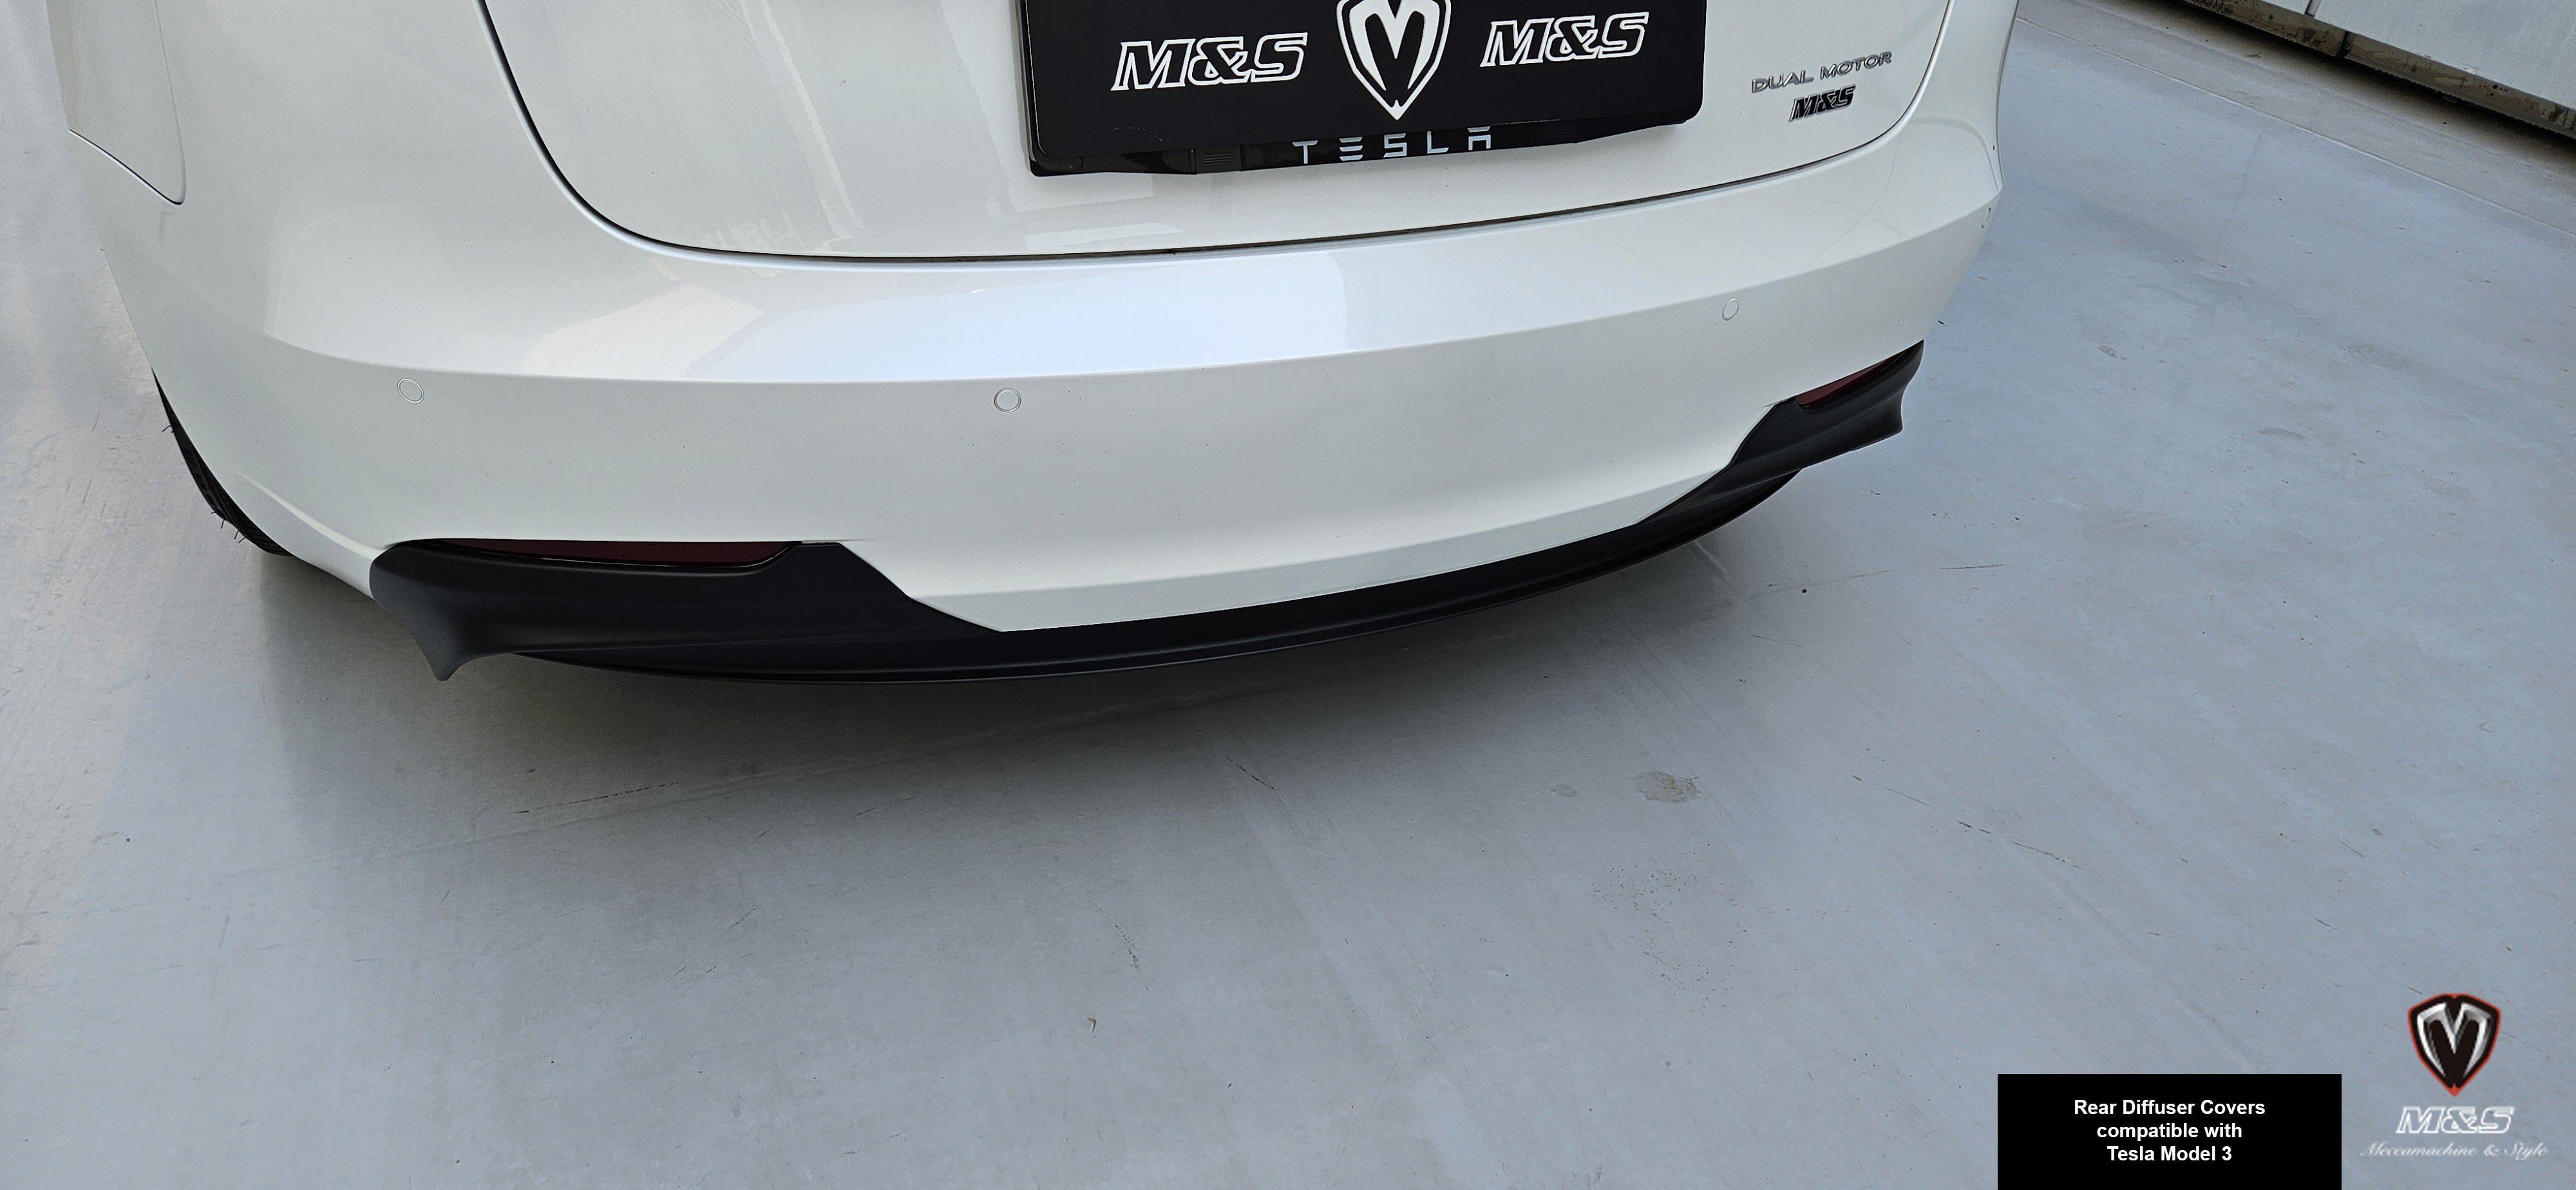 M&S Rear Diffuser Covers for Tesla Model 3